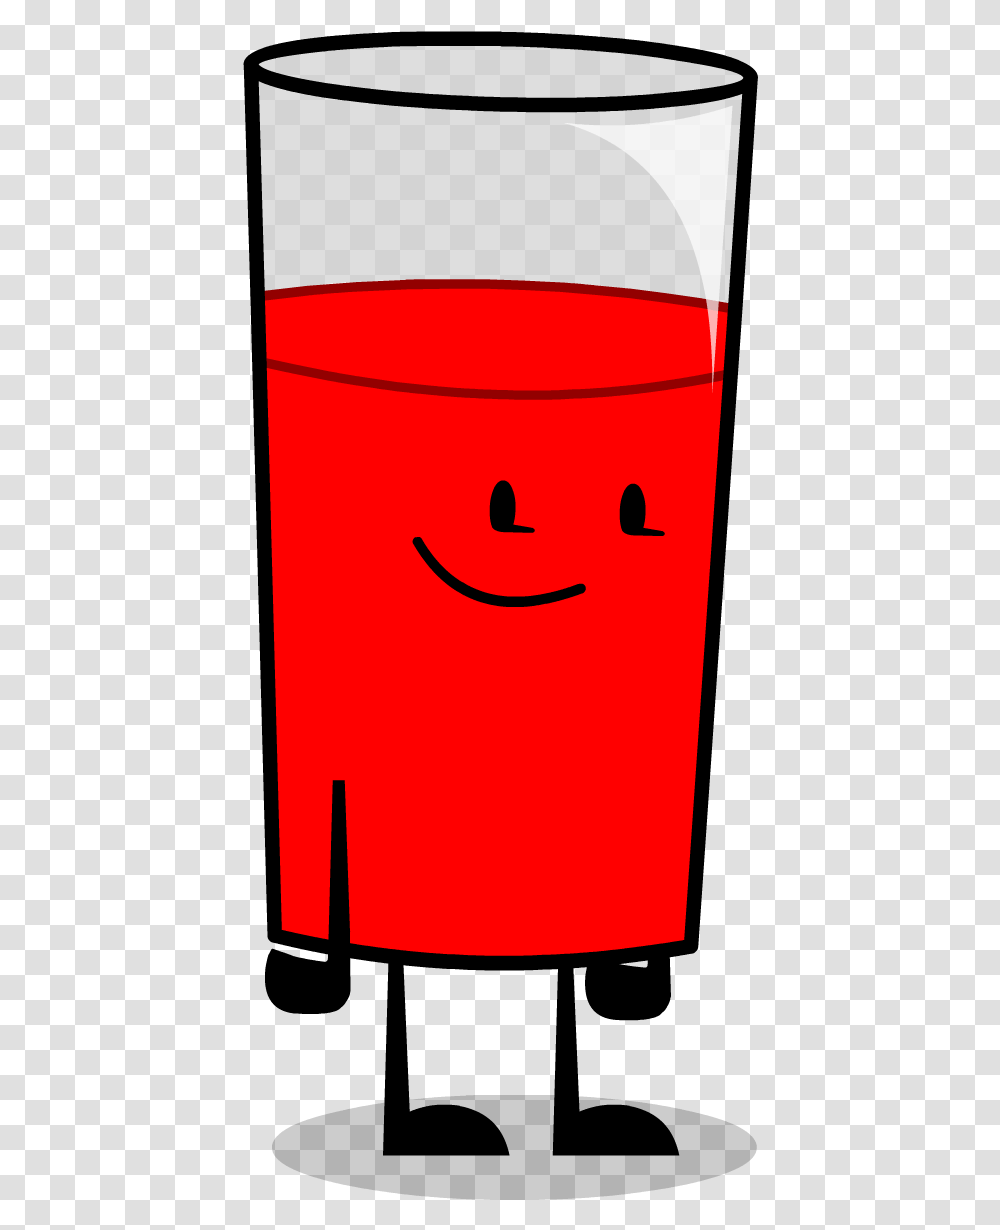 Kool Aid Commission By Toonmaster99 D7e89a2 Smiley, Bottle, Cup, Soda, Beverage Transparent Png